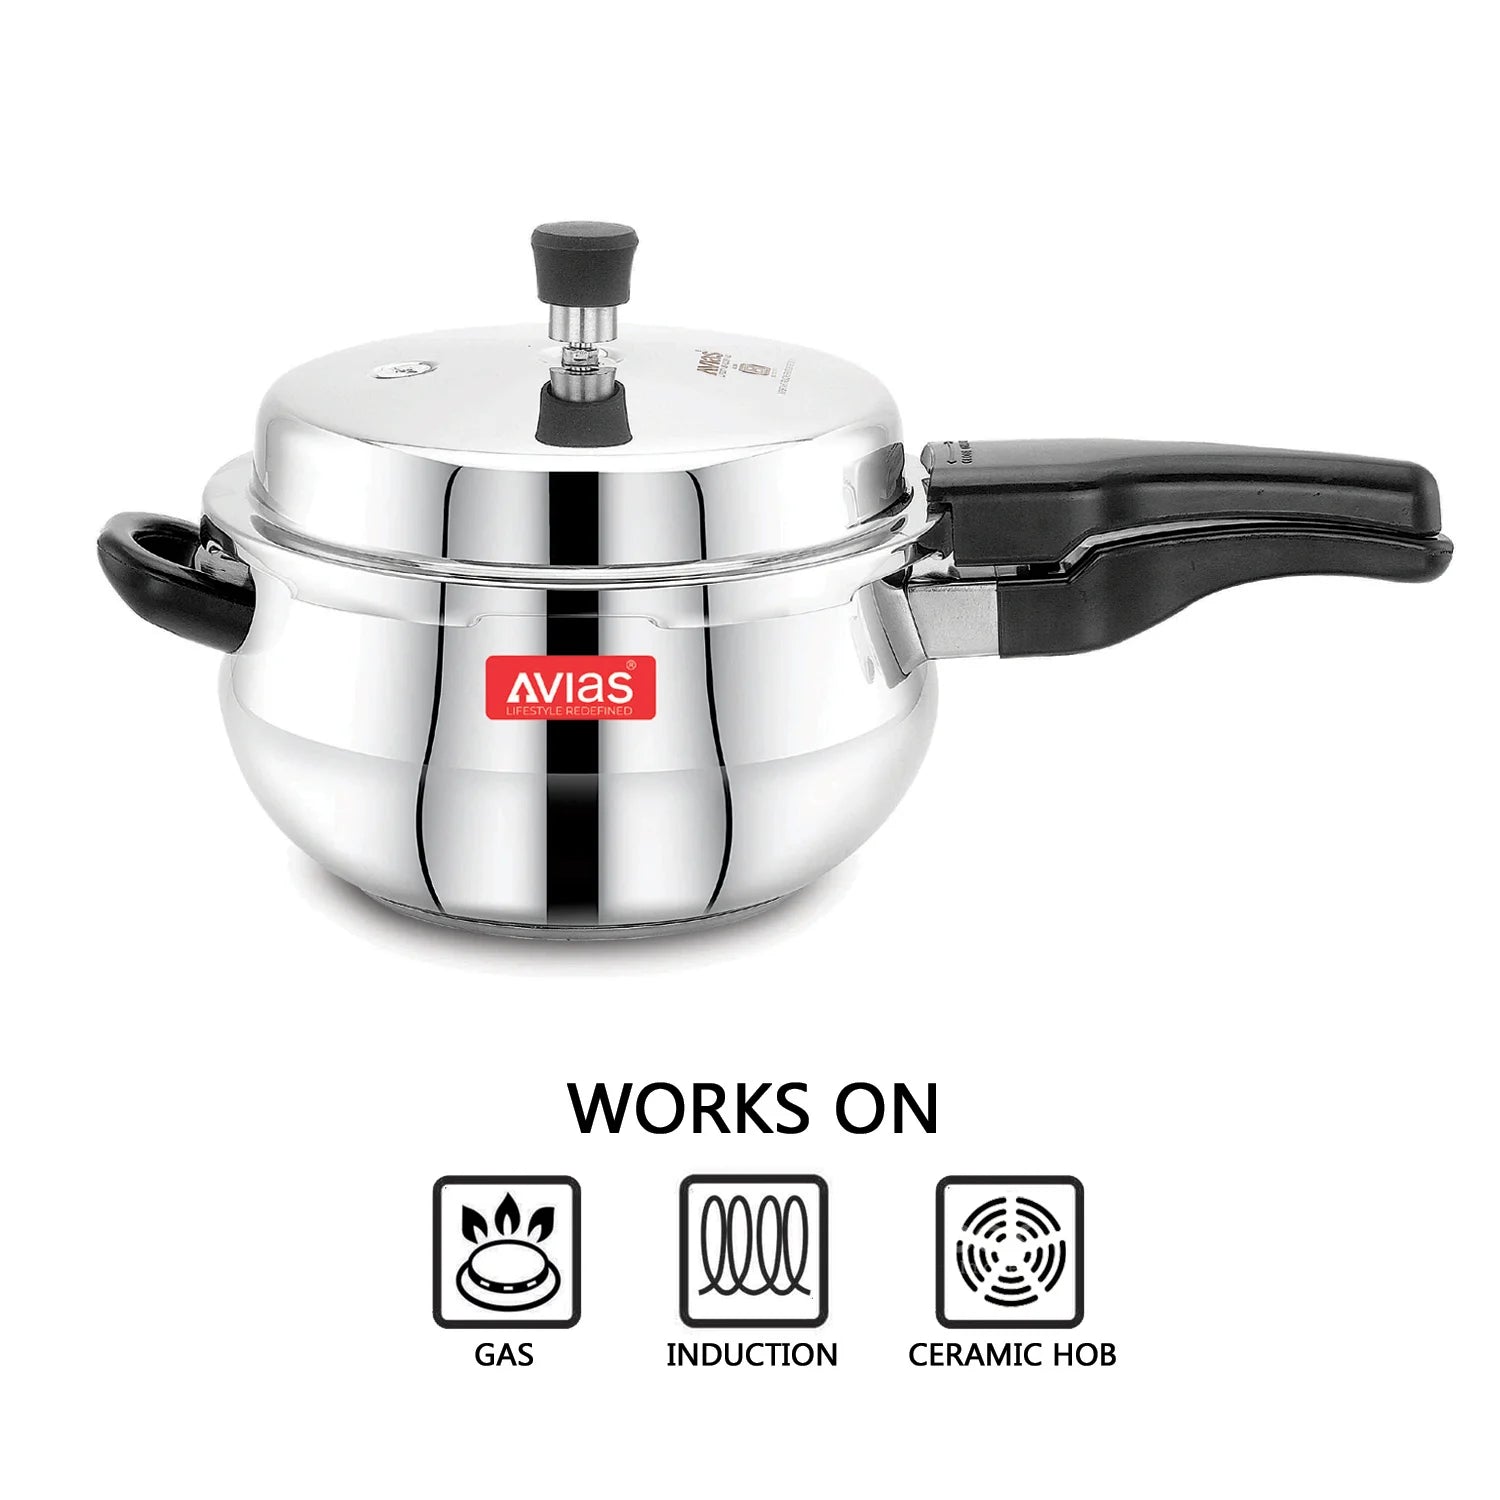 AVIAS Avanti Handi high-quality stainless steel pressure cooker compatibility